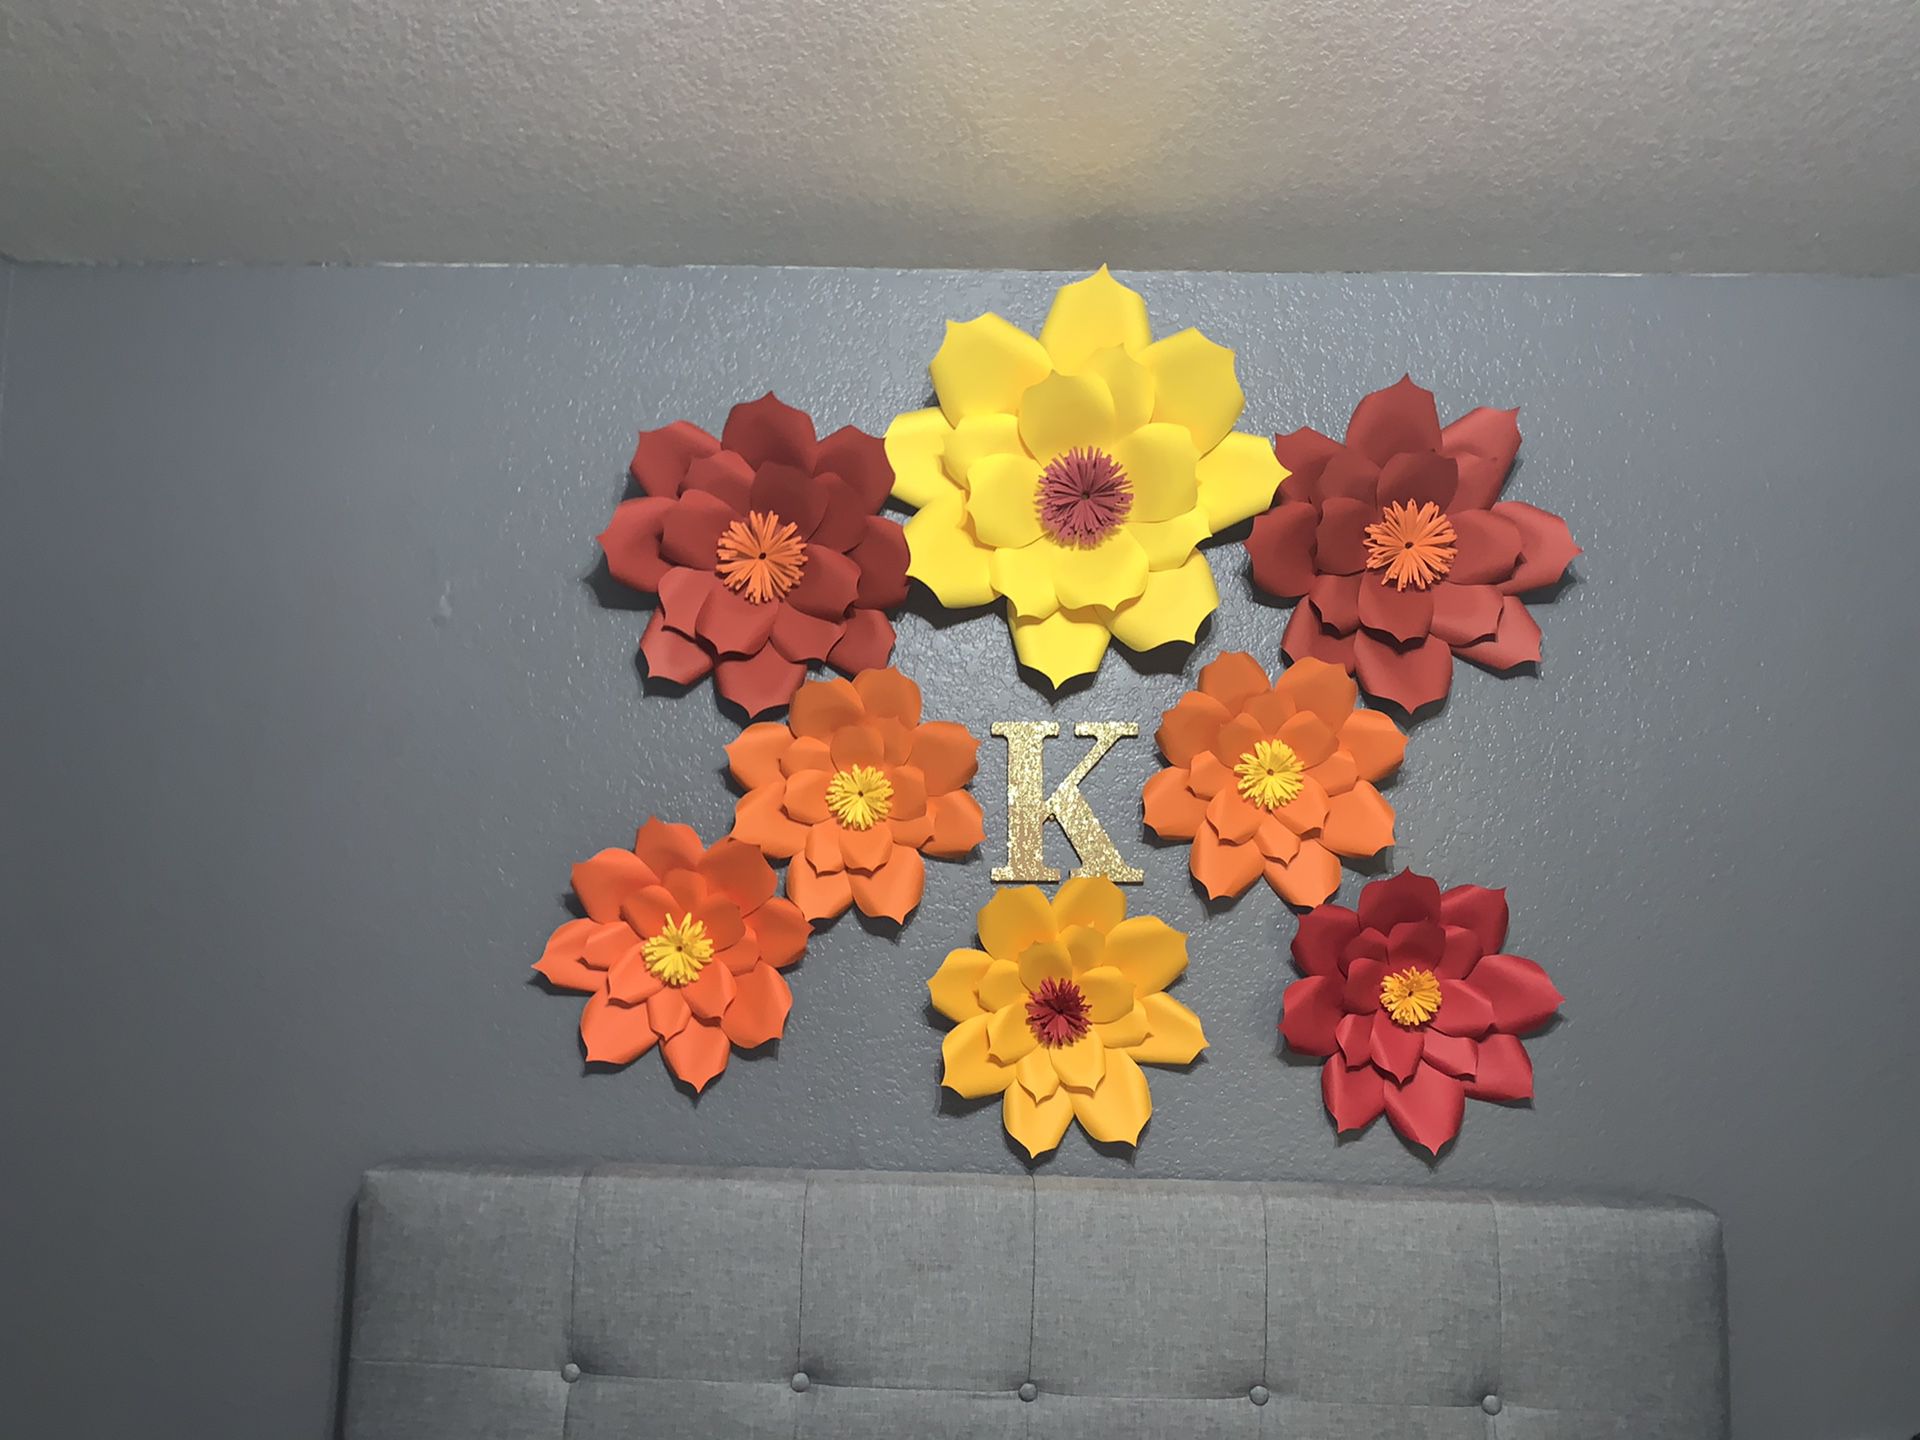 Paper Flowers for Fall Decoration